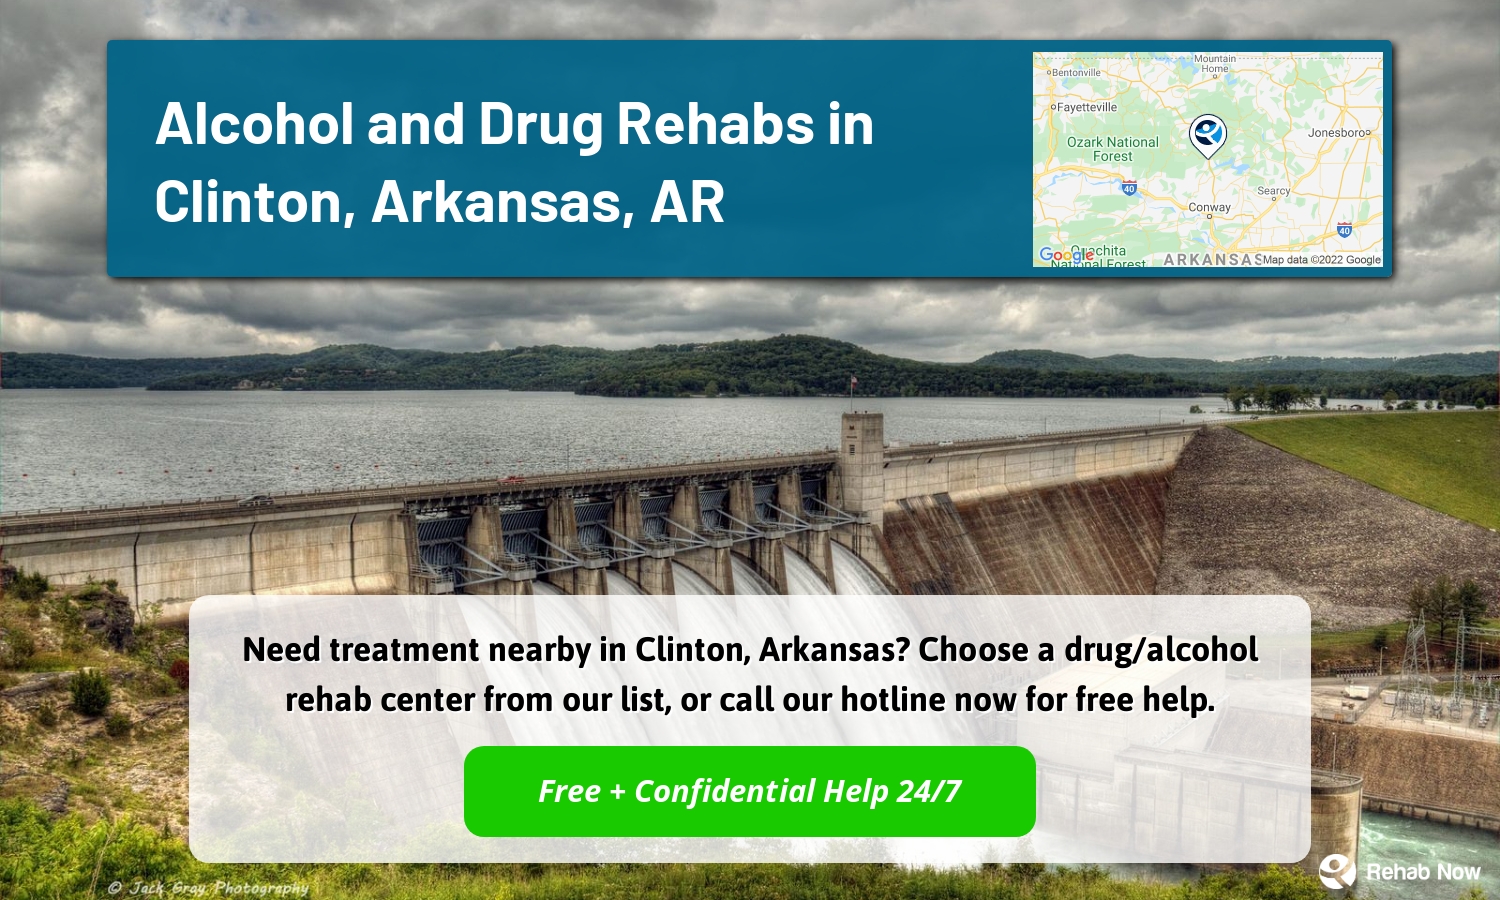 Need treatment nearby in Clinton, Arkansas? Choose a drug/alcohol rehab center from our list, or call our hotline now for free help.